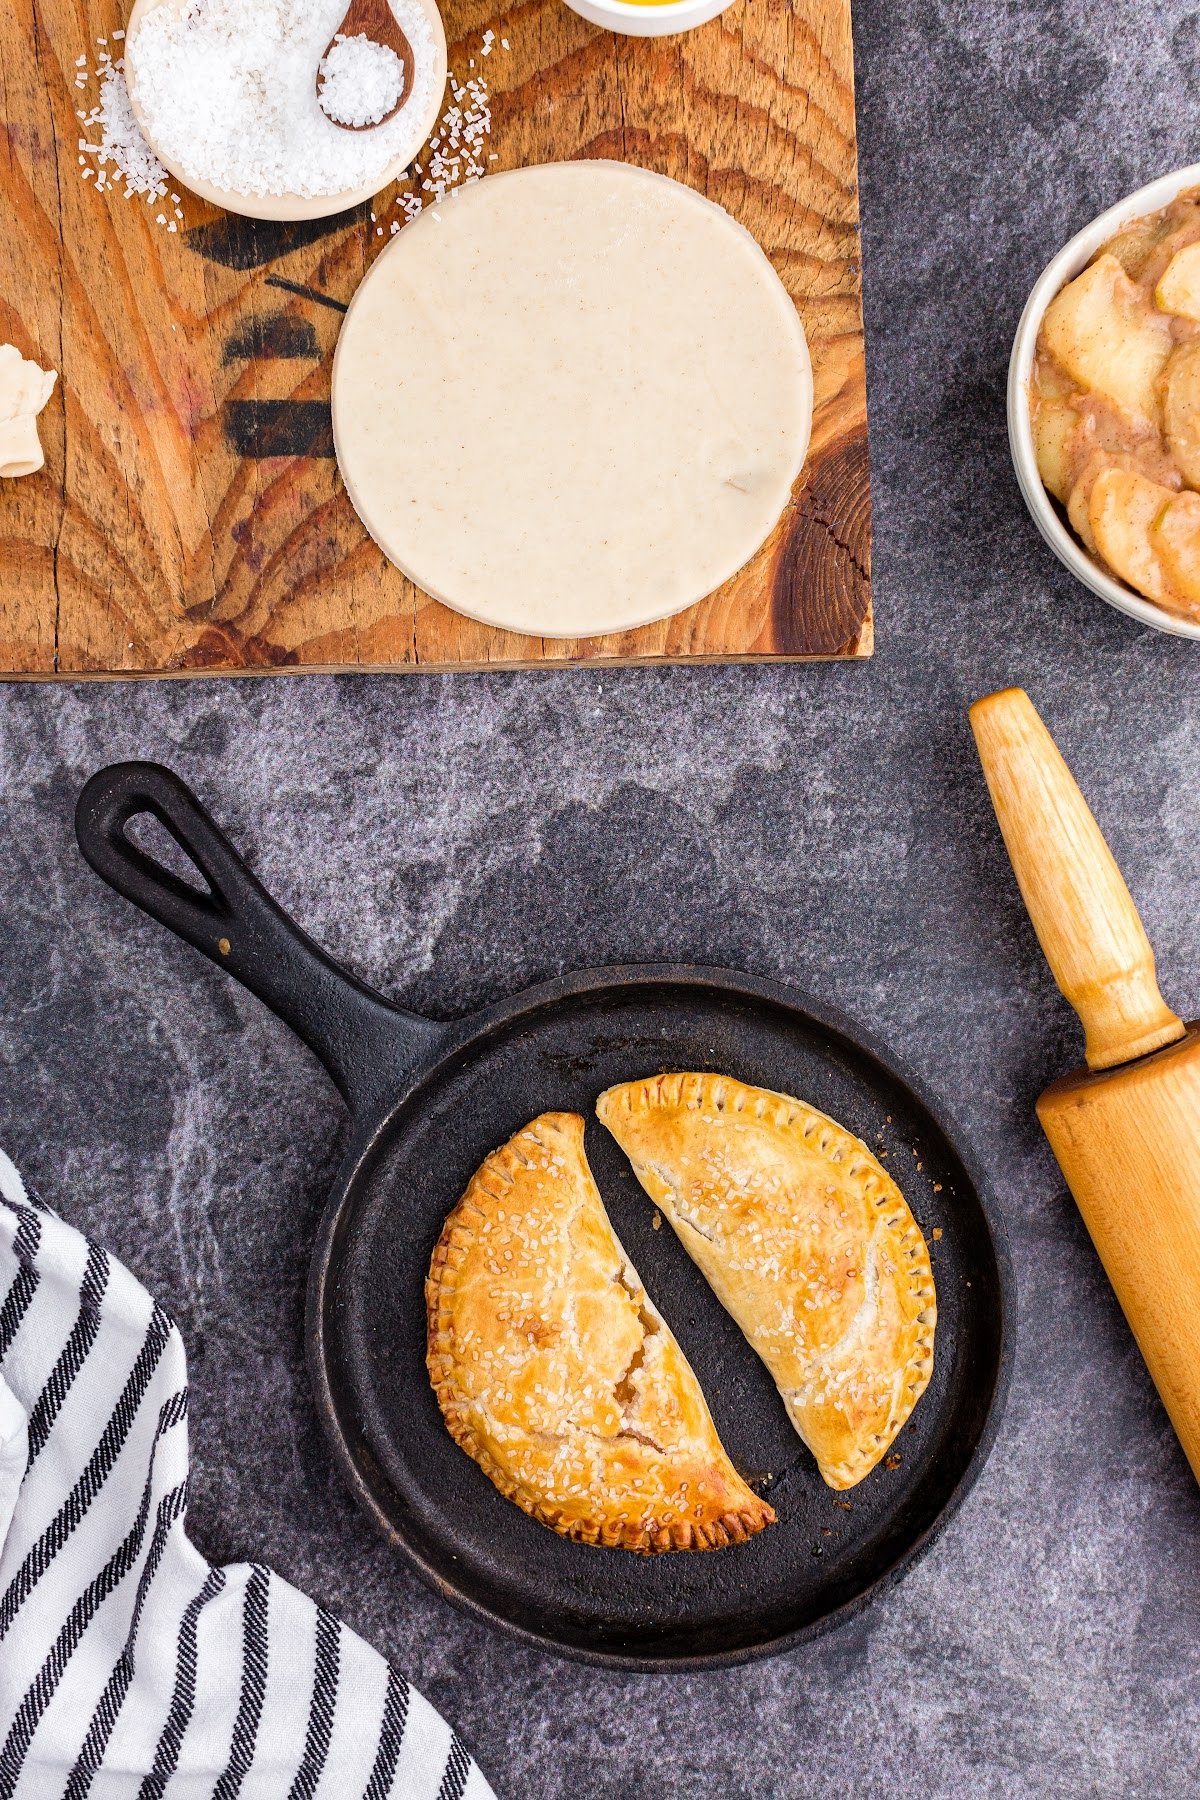 Two fully cooked hand pies in a cast iron skillet, with rolling pin and cutting board with pie crust.